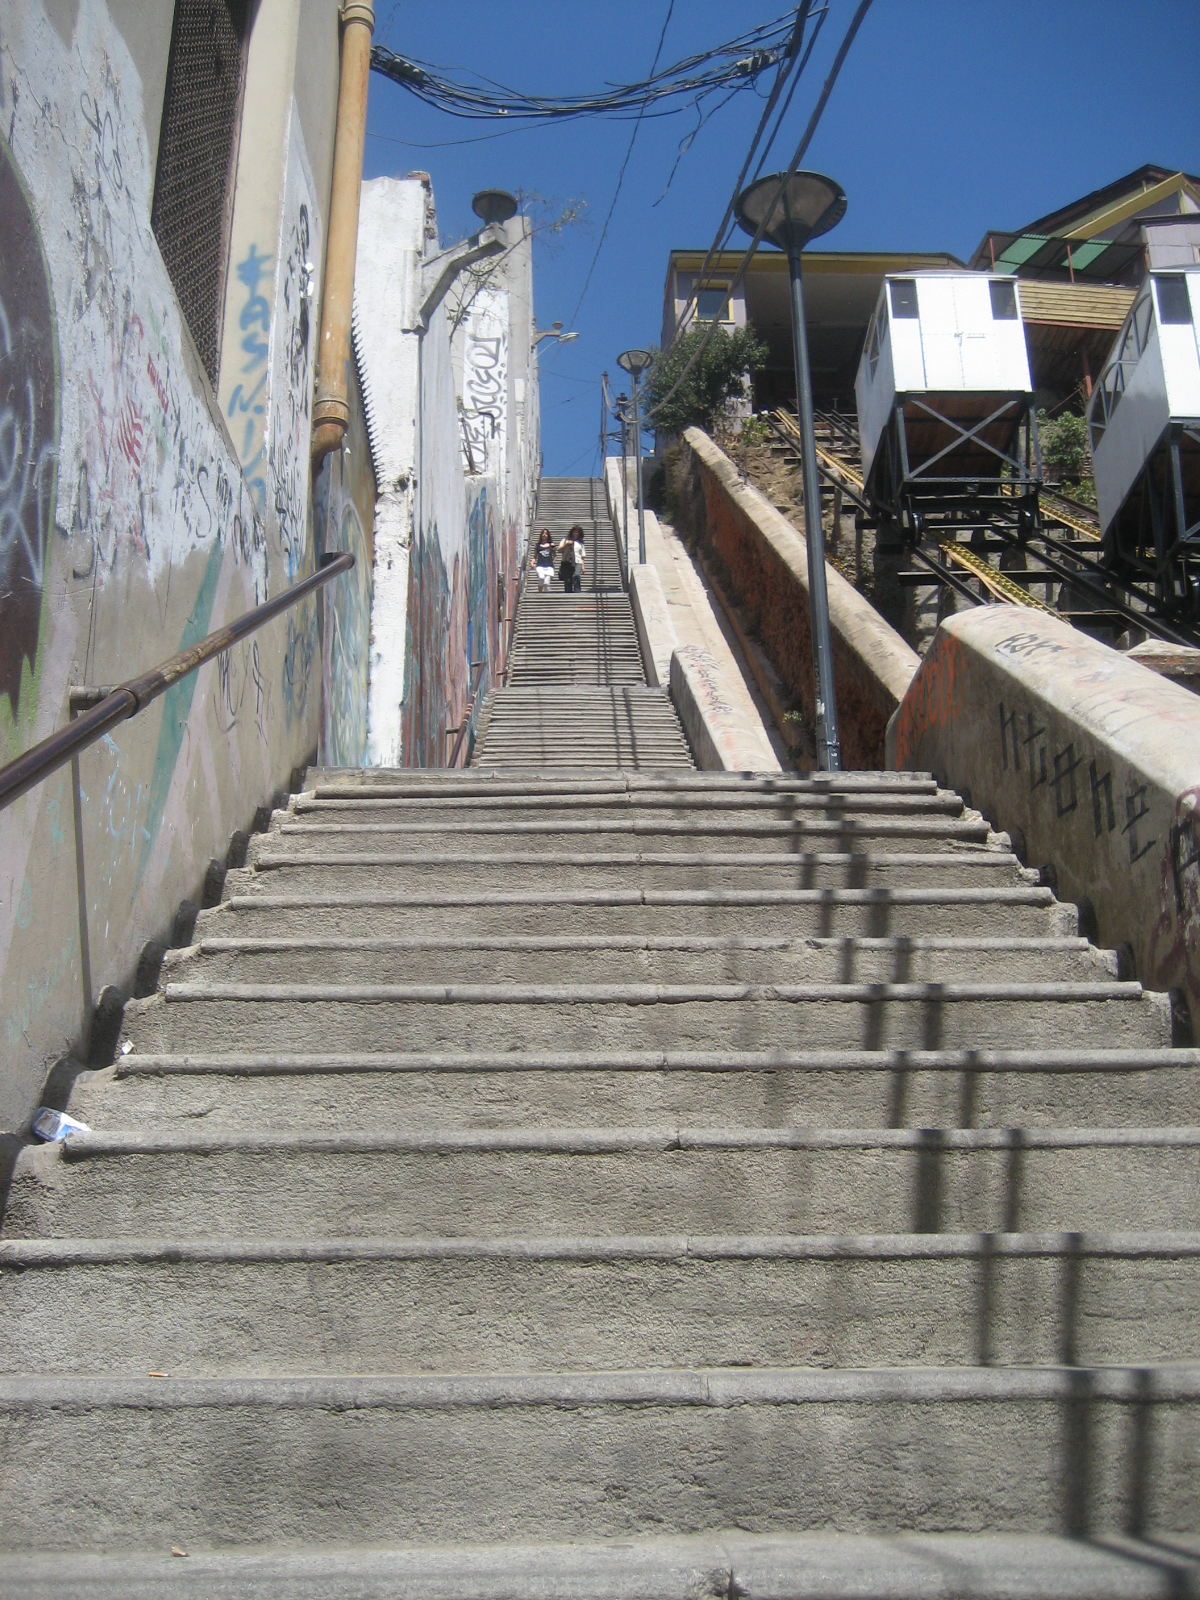 Fonicular and stairs in Valparaiso, Chile